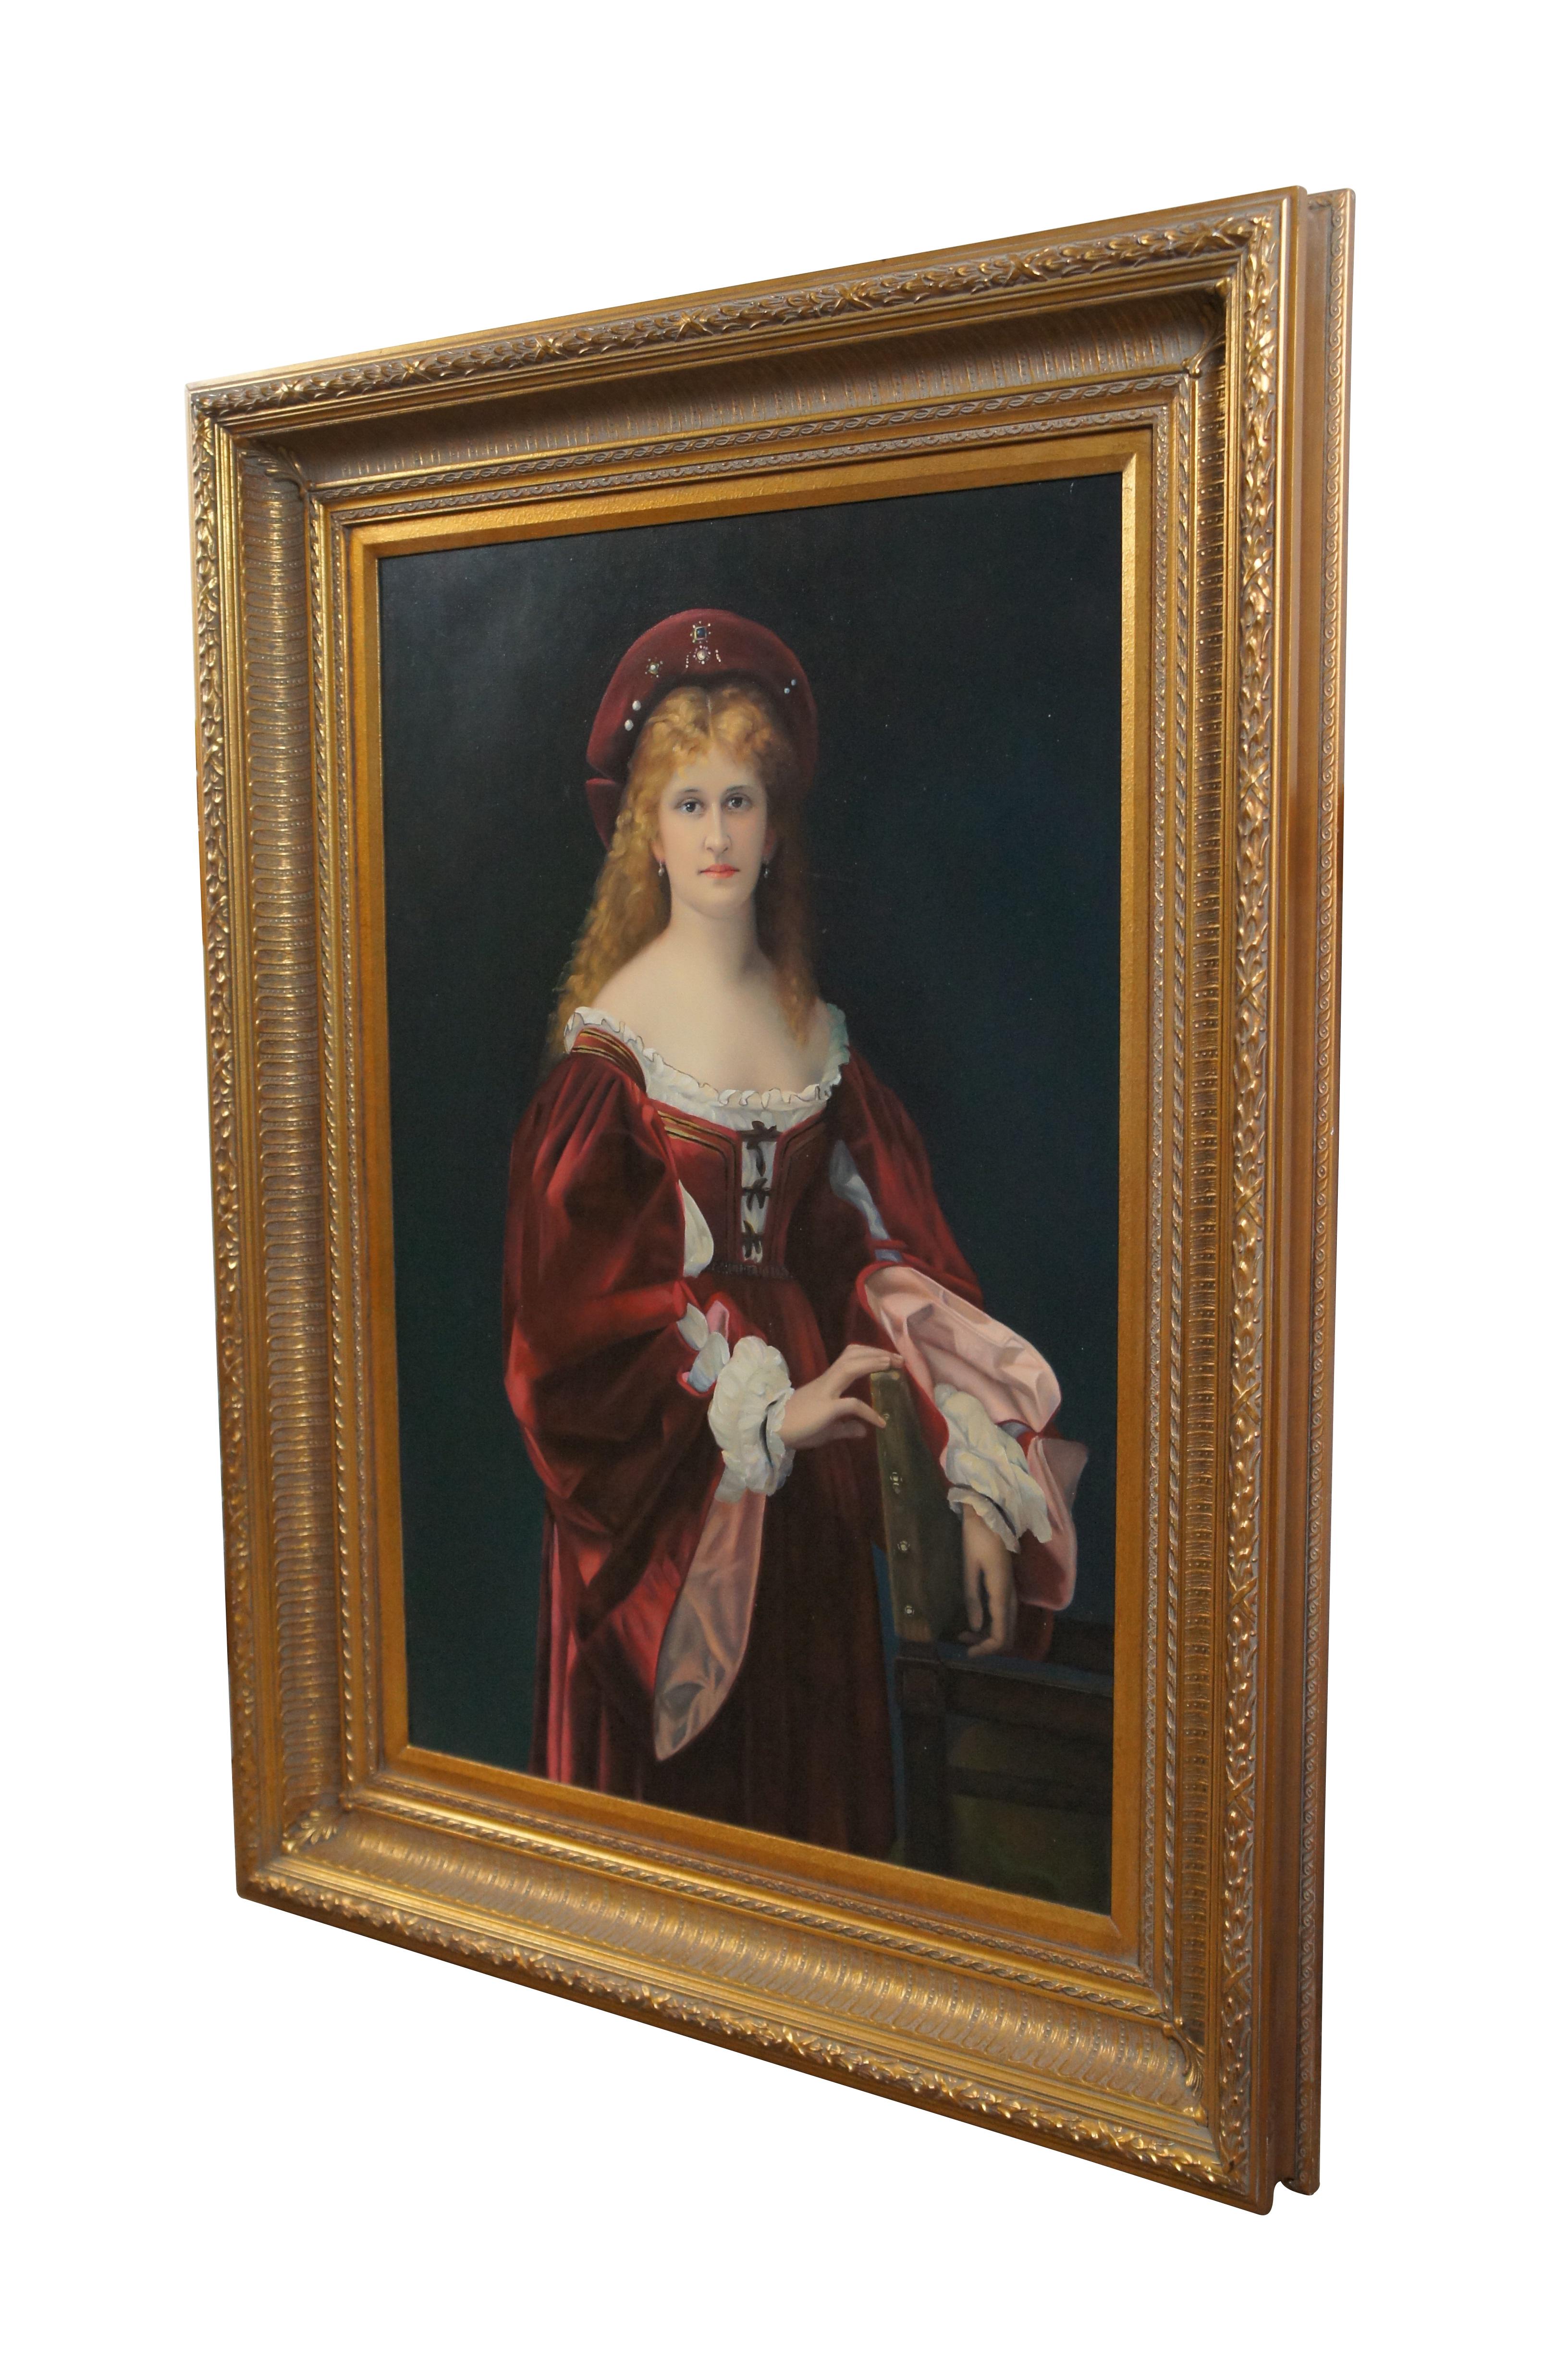 #39707

Very large and impressive hand painted reproduction oil portrait painting on canvas after “Patricienne de Venise” (Patrician of Venice) originally painted in 1881 by Alexandre Cabanel, showing a woman with long red hair in an elegant red